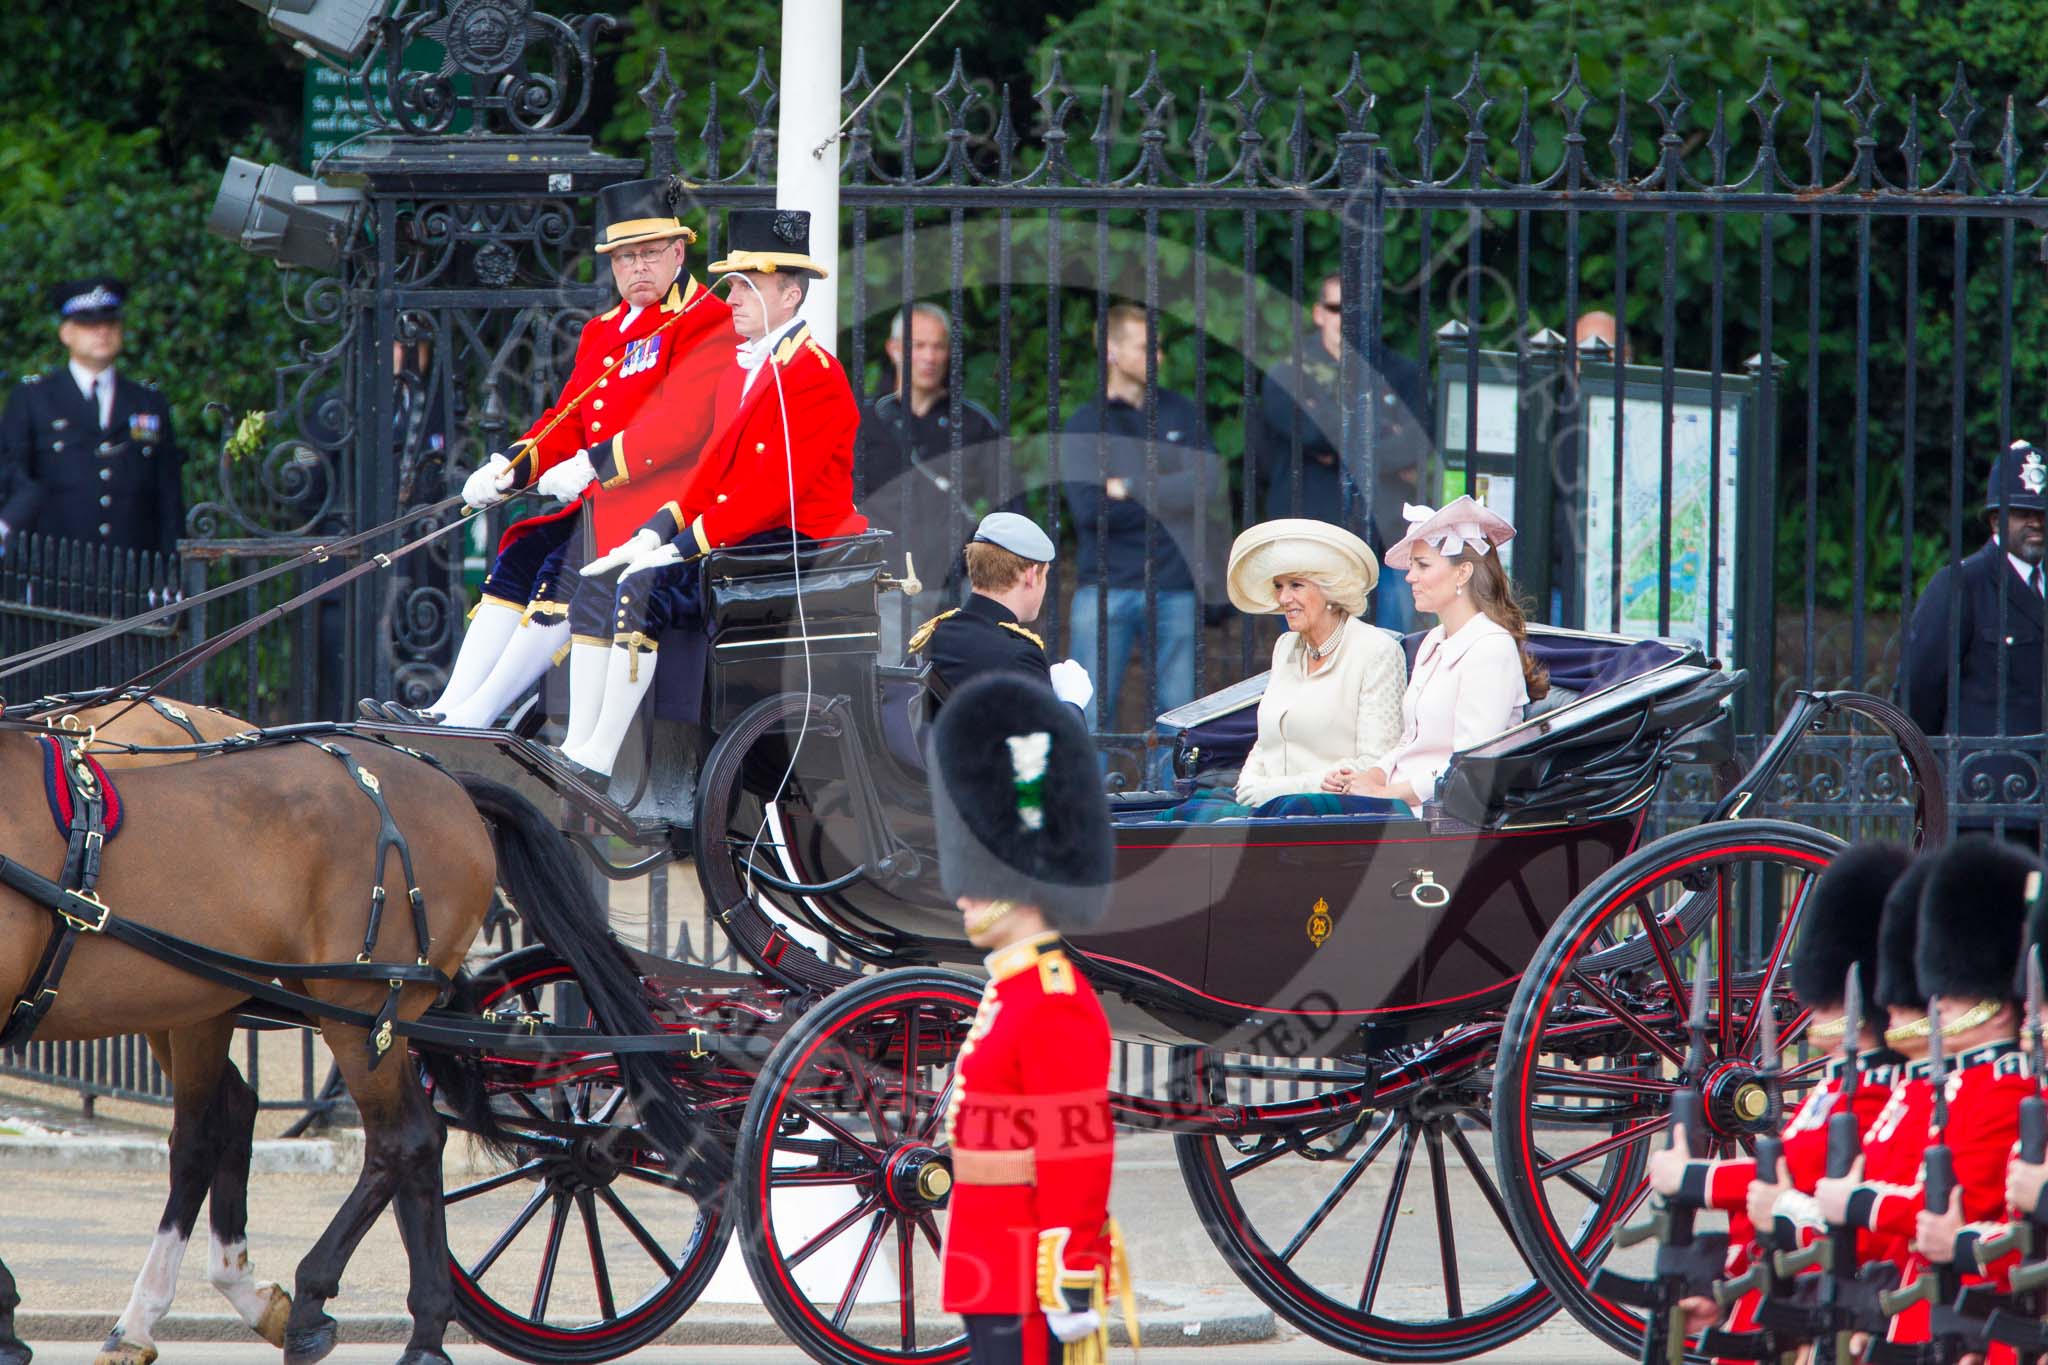 Trooping the Colour 2013: HRH Prince Harry of Wales, HRH The Duchess of Cornwall  and HRH The Duchess of Cambridge in the first barouche carriage on the way across Horse Guards Parade to watch the parade from the Major General's office. Image #189, 15 June 2013 10:49 Horse Guards Parade, London, UK